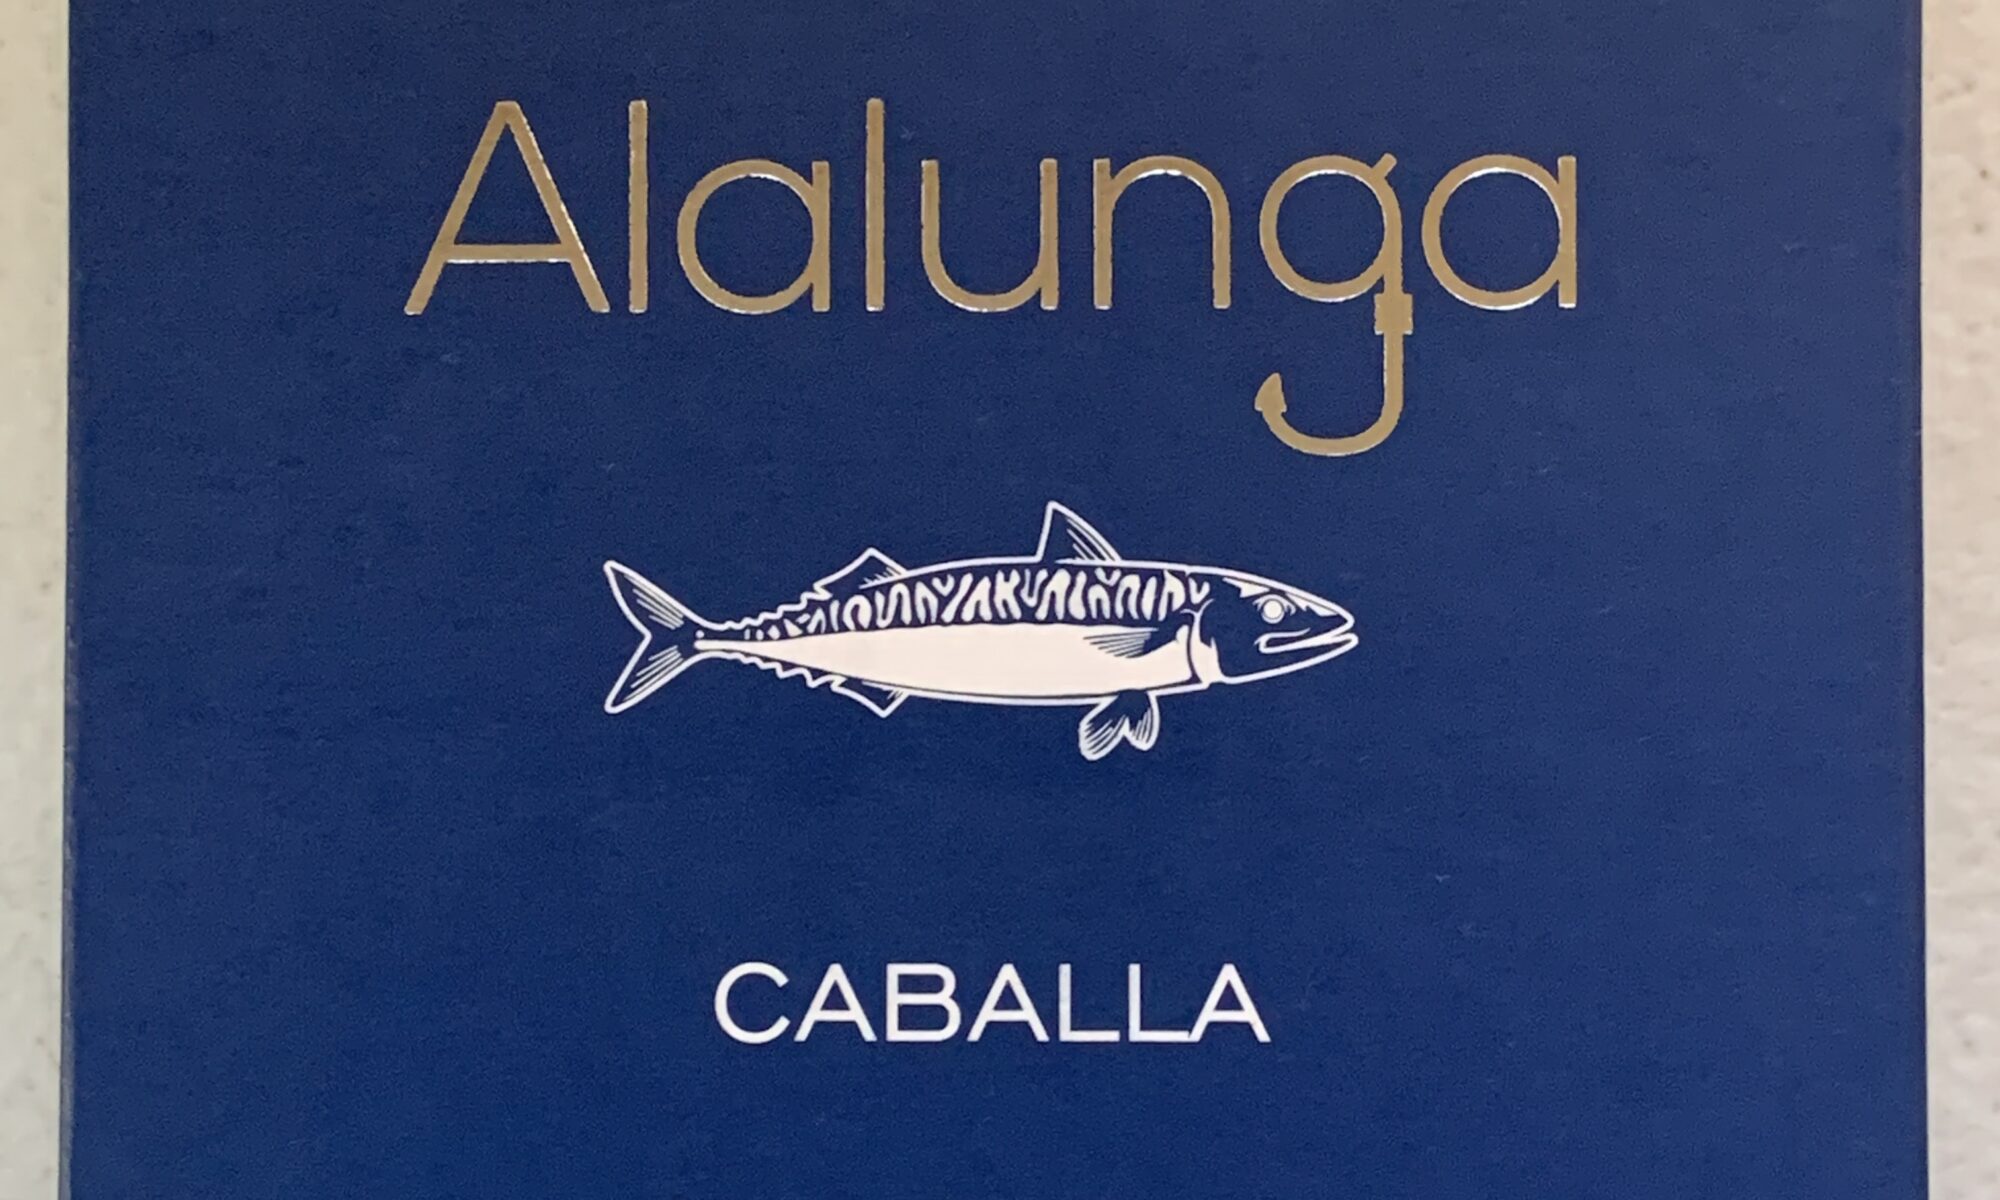 Image of the front of a package of Artesanos Alalunga Mackerel in Olive Oil